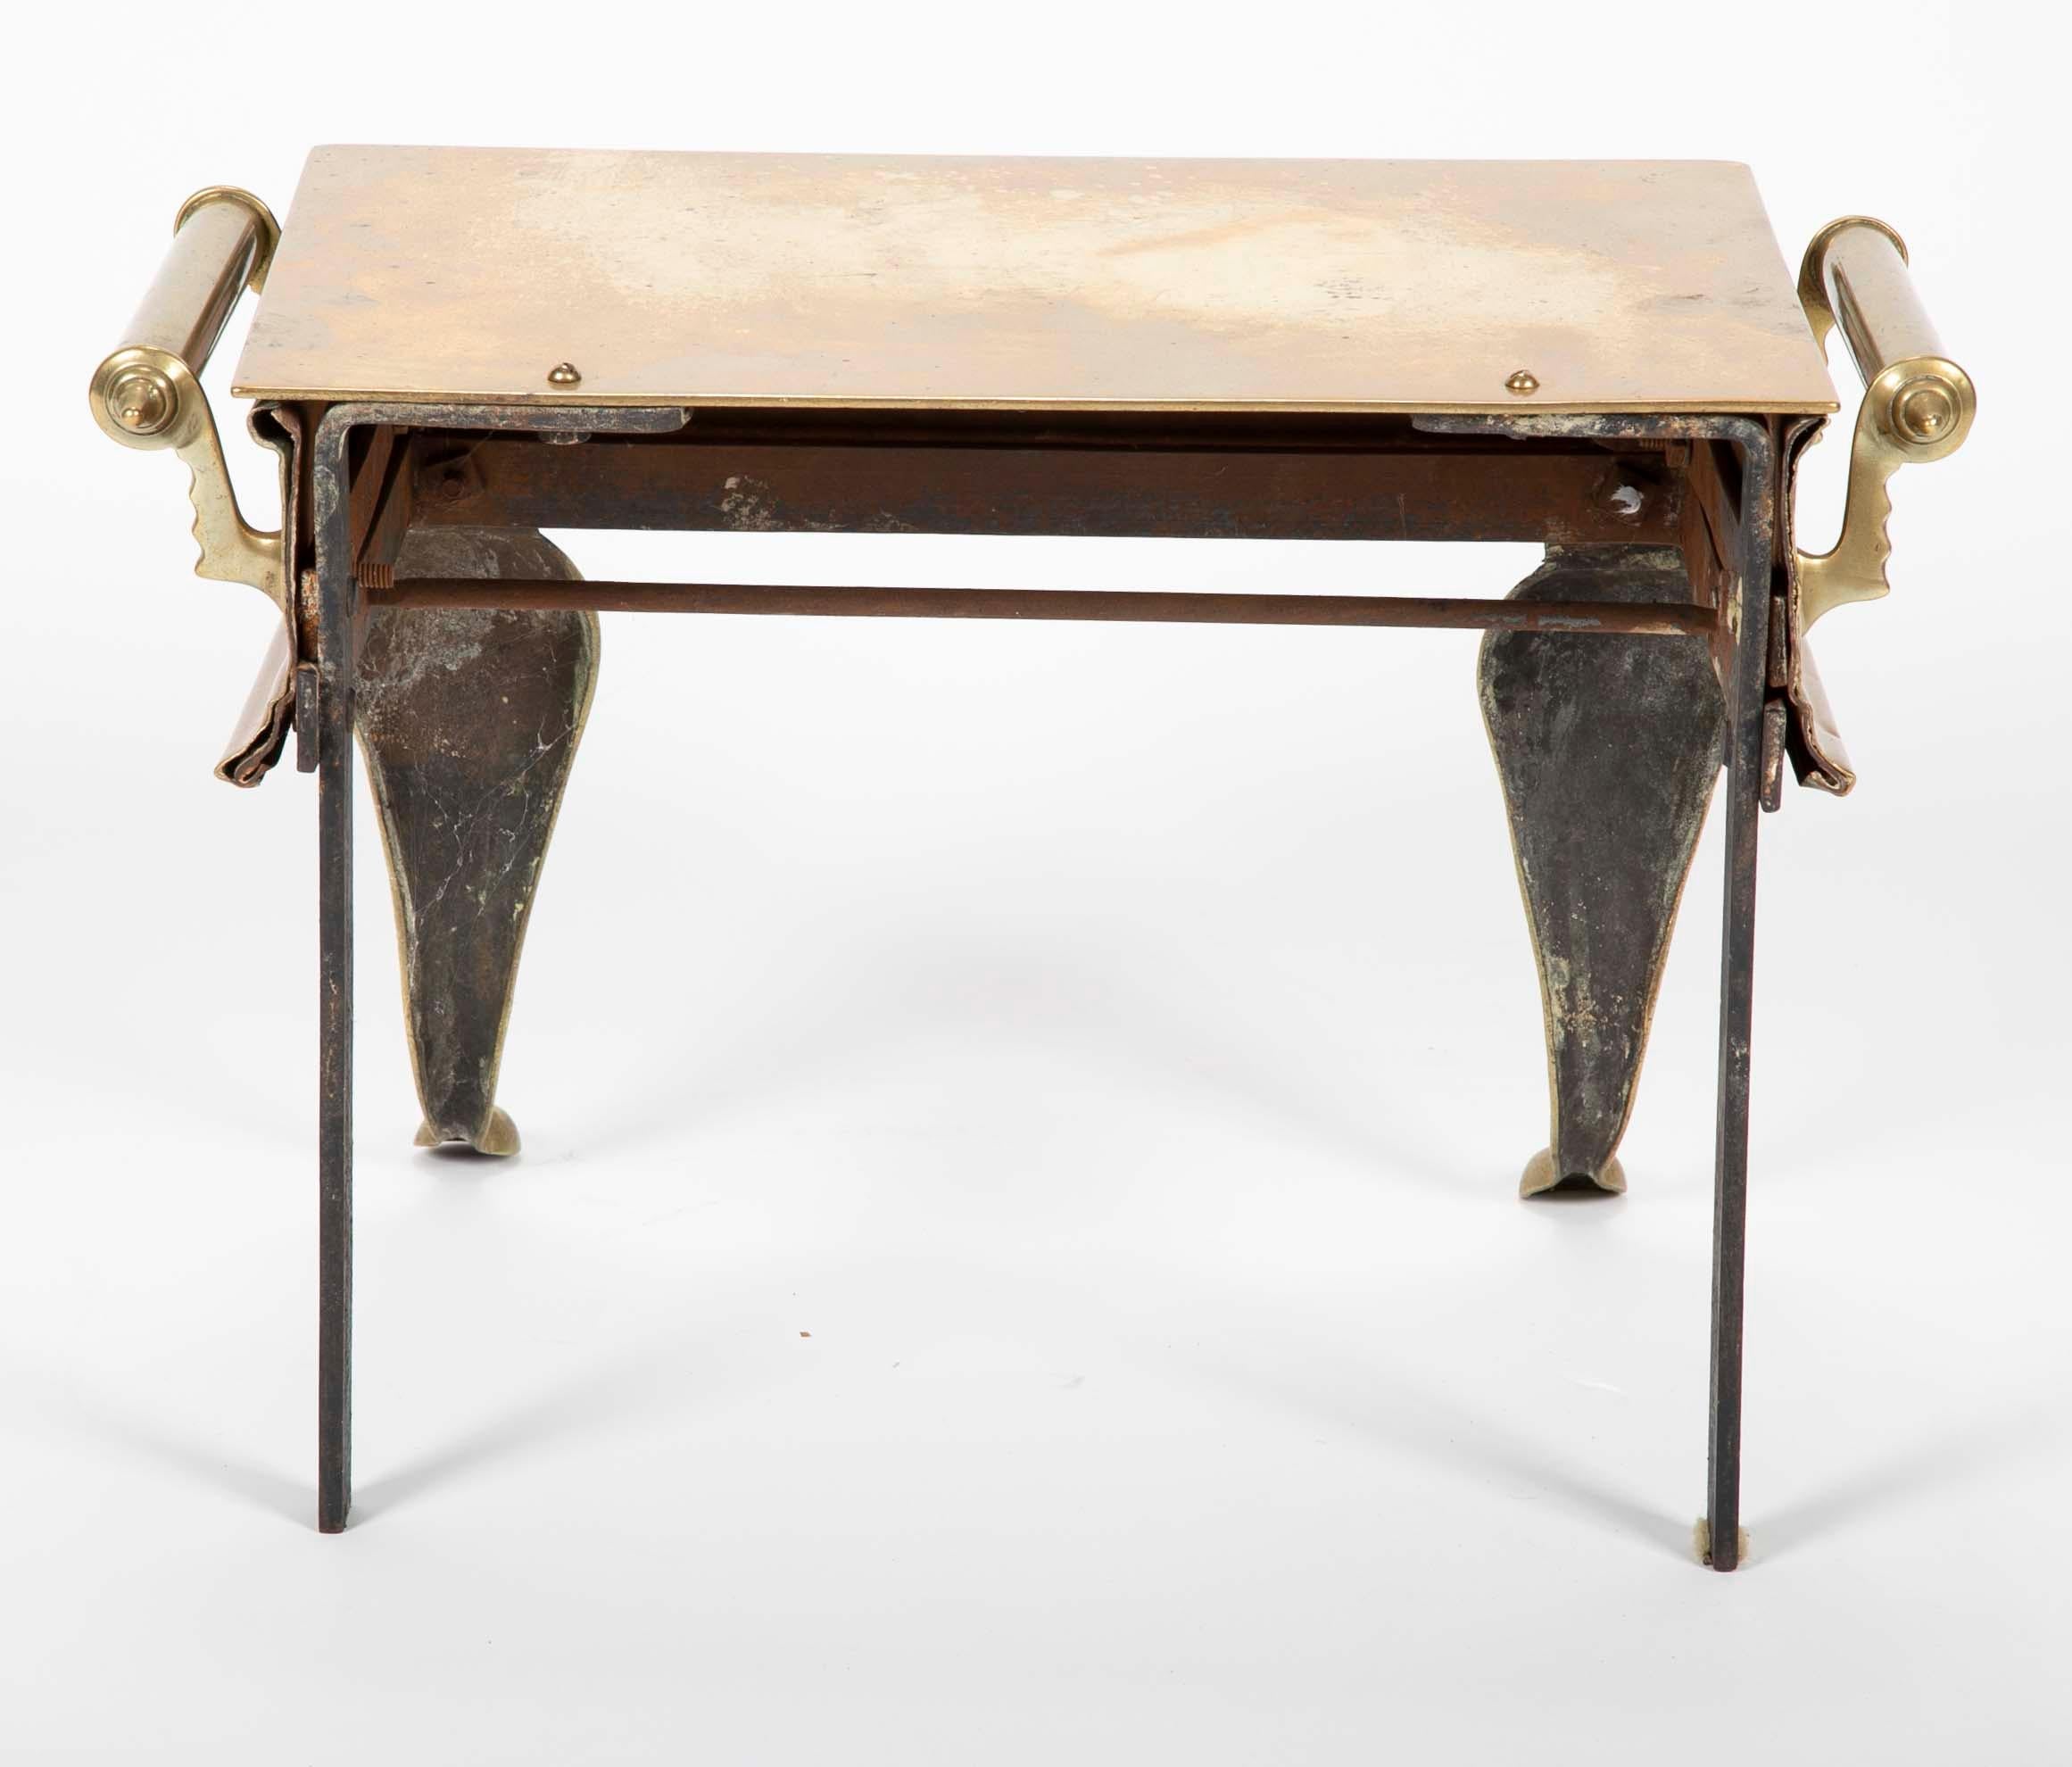 19th Century English Regency Brass Footman Stool or Side Table For Sale 6